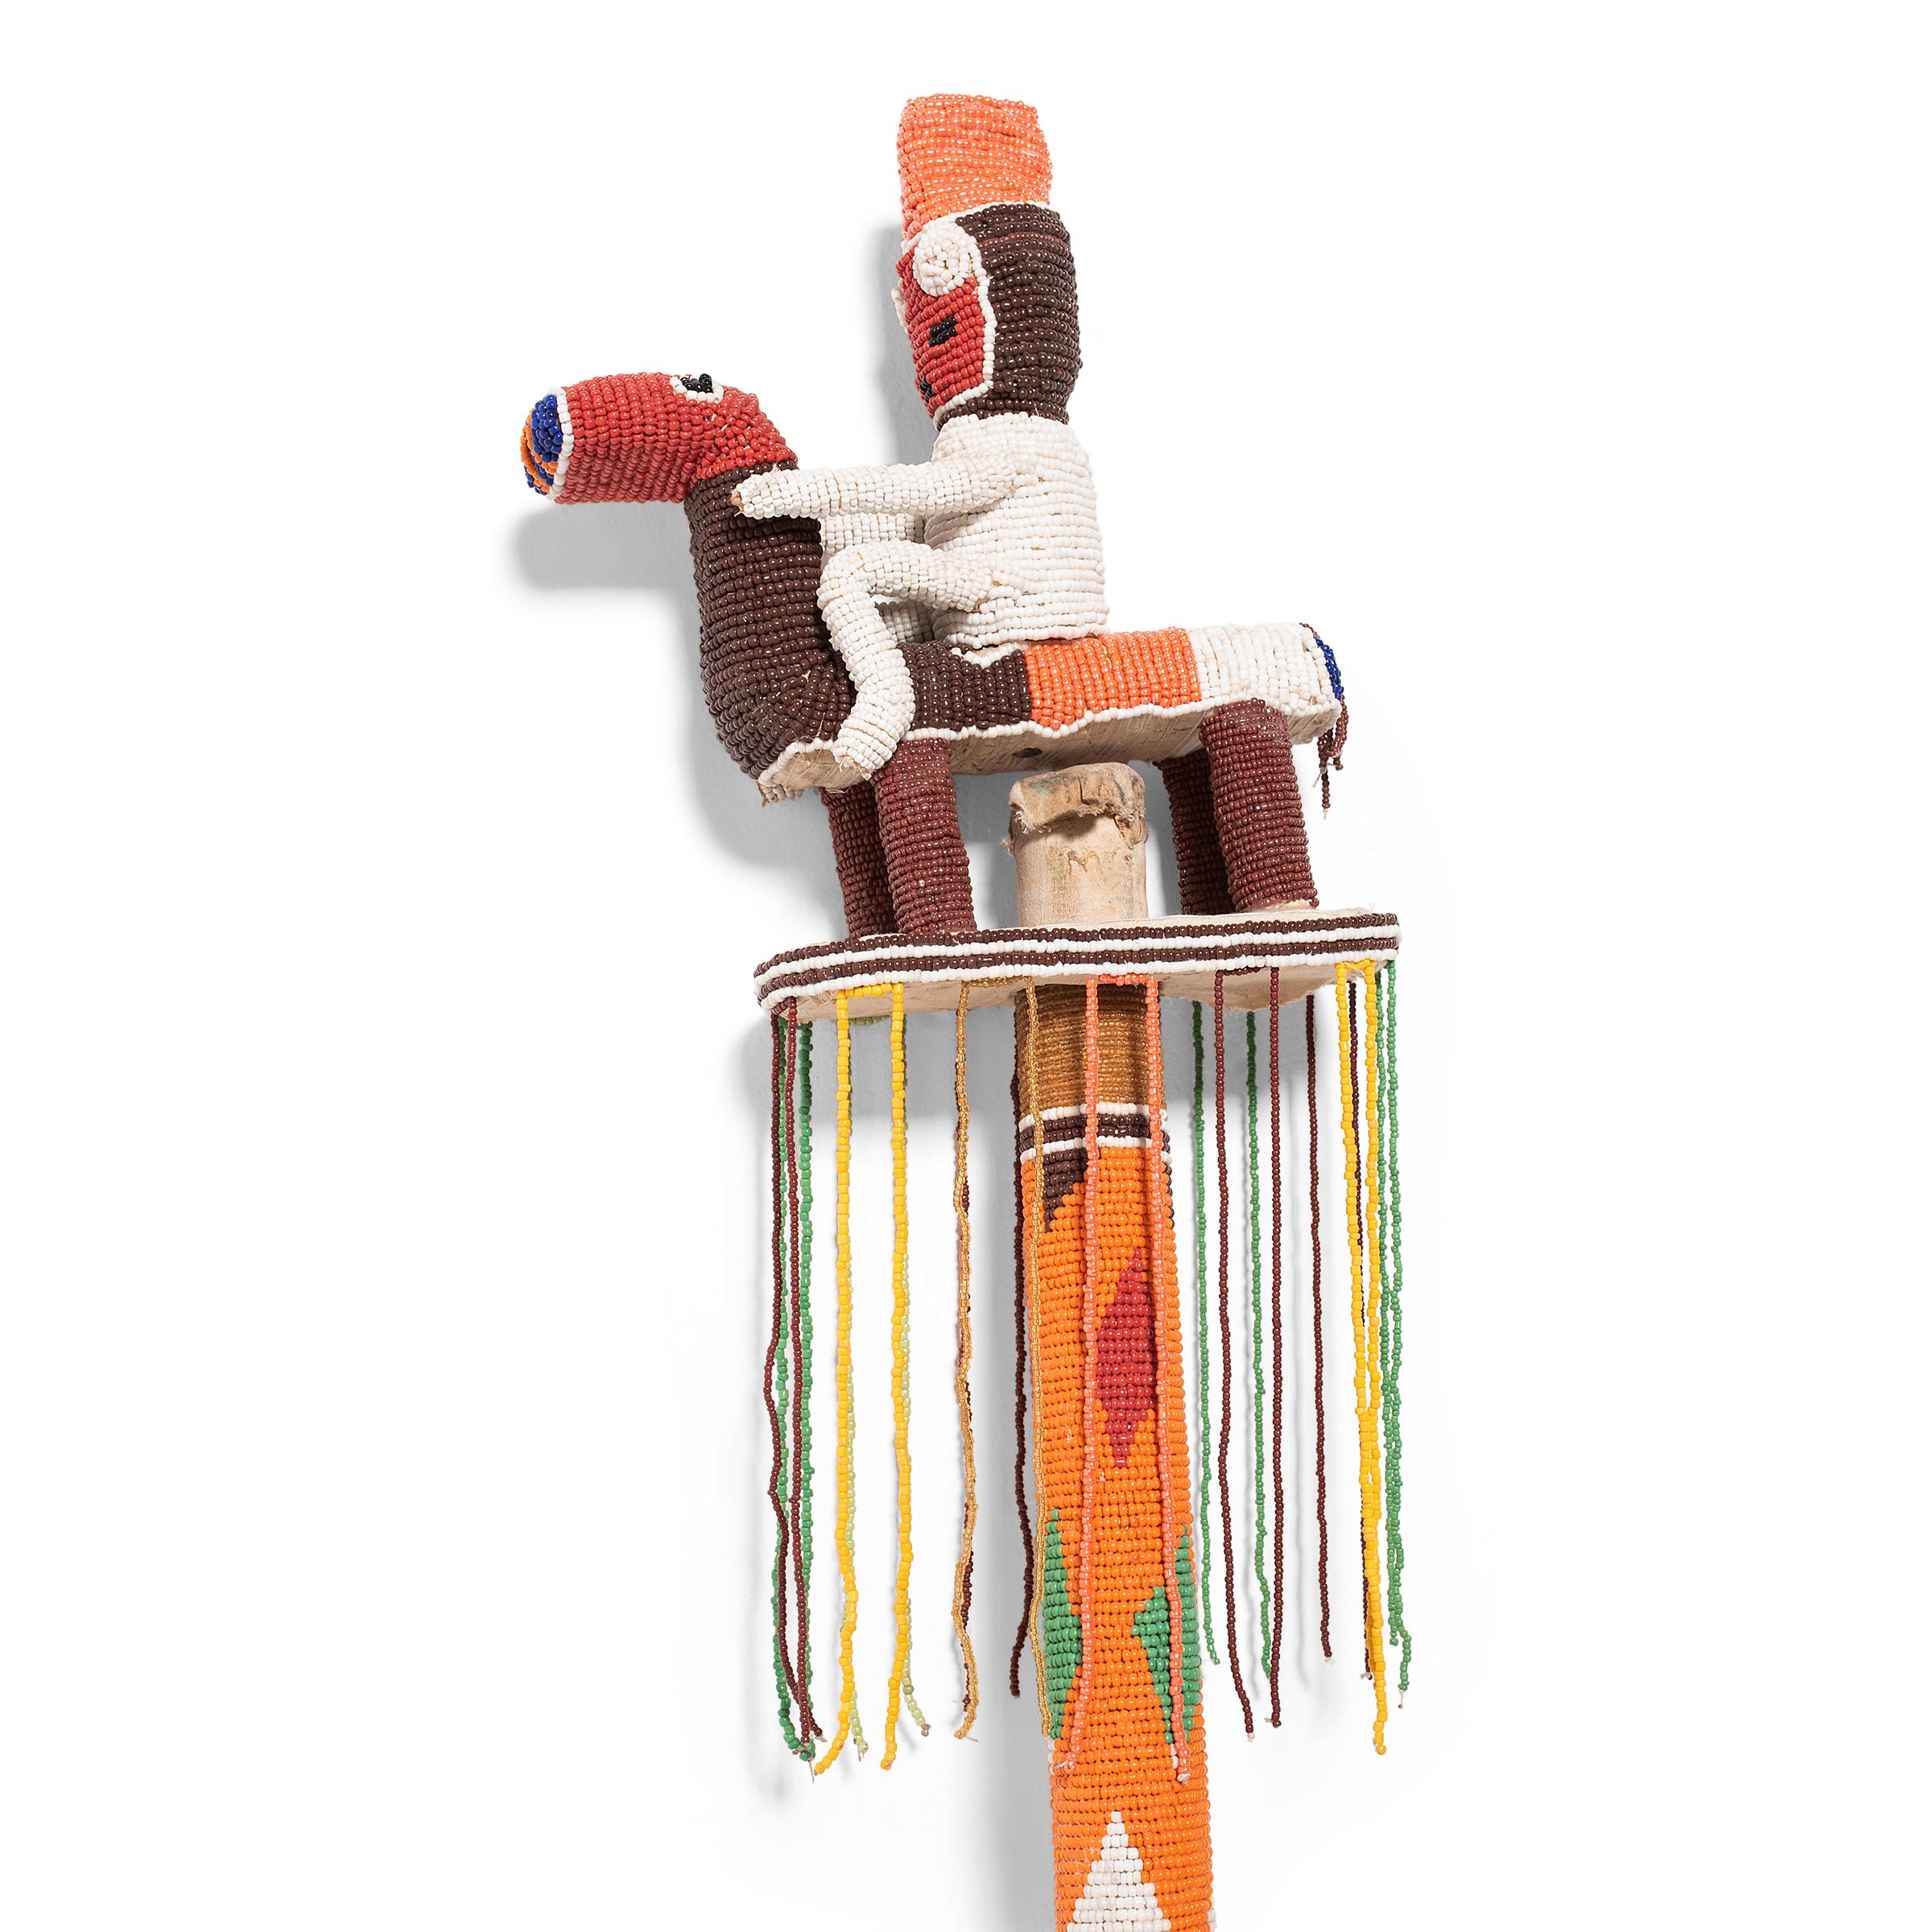 The Yoruba people reserve the use of glass beads for royalty, priests and priestesses, as well as embellishing ritual and ceremonial objects. Though only kings are allowed to use beaded regalia, this beaded staff serves as a surrogate for the ruler